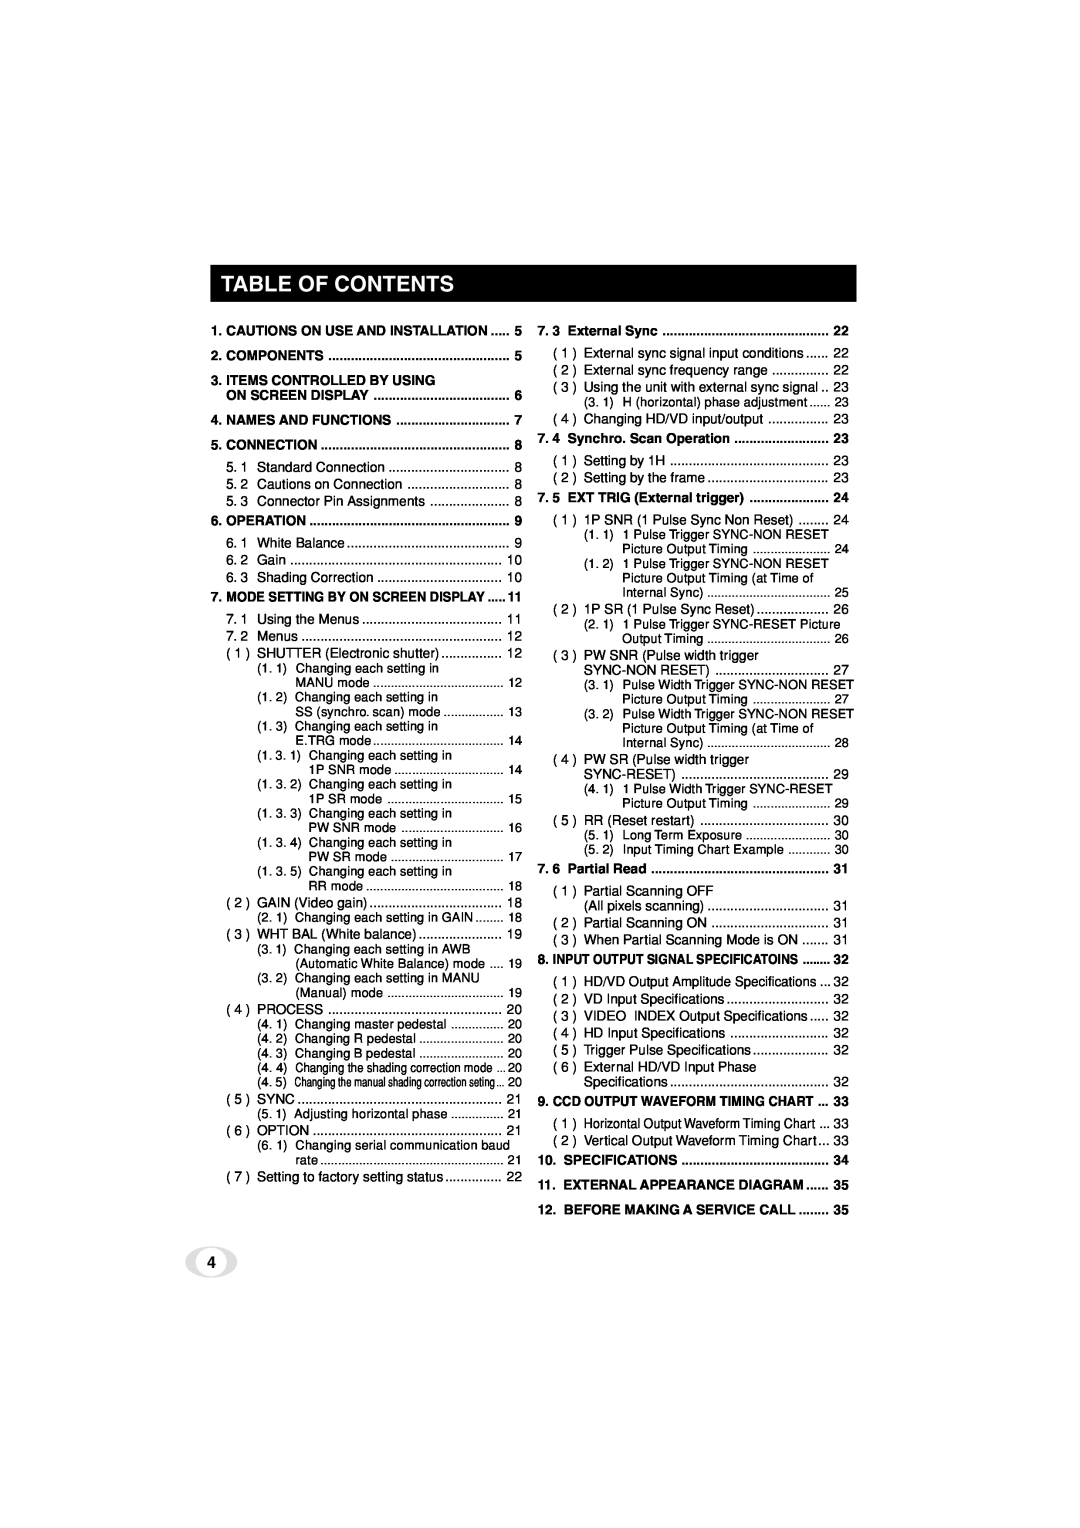 Toshiba IK-TF5C instruction manual Table Of Contents, Items Controlled By Using, Operation 